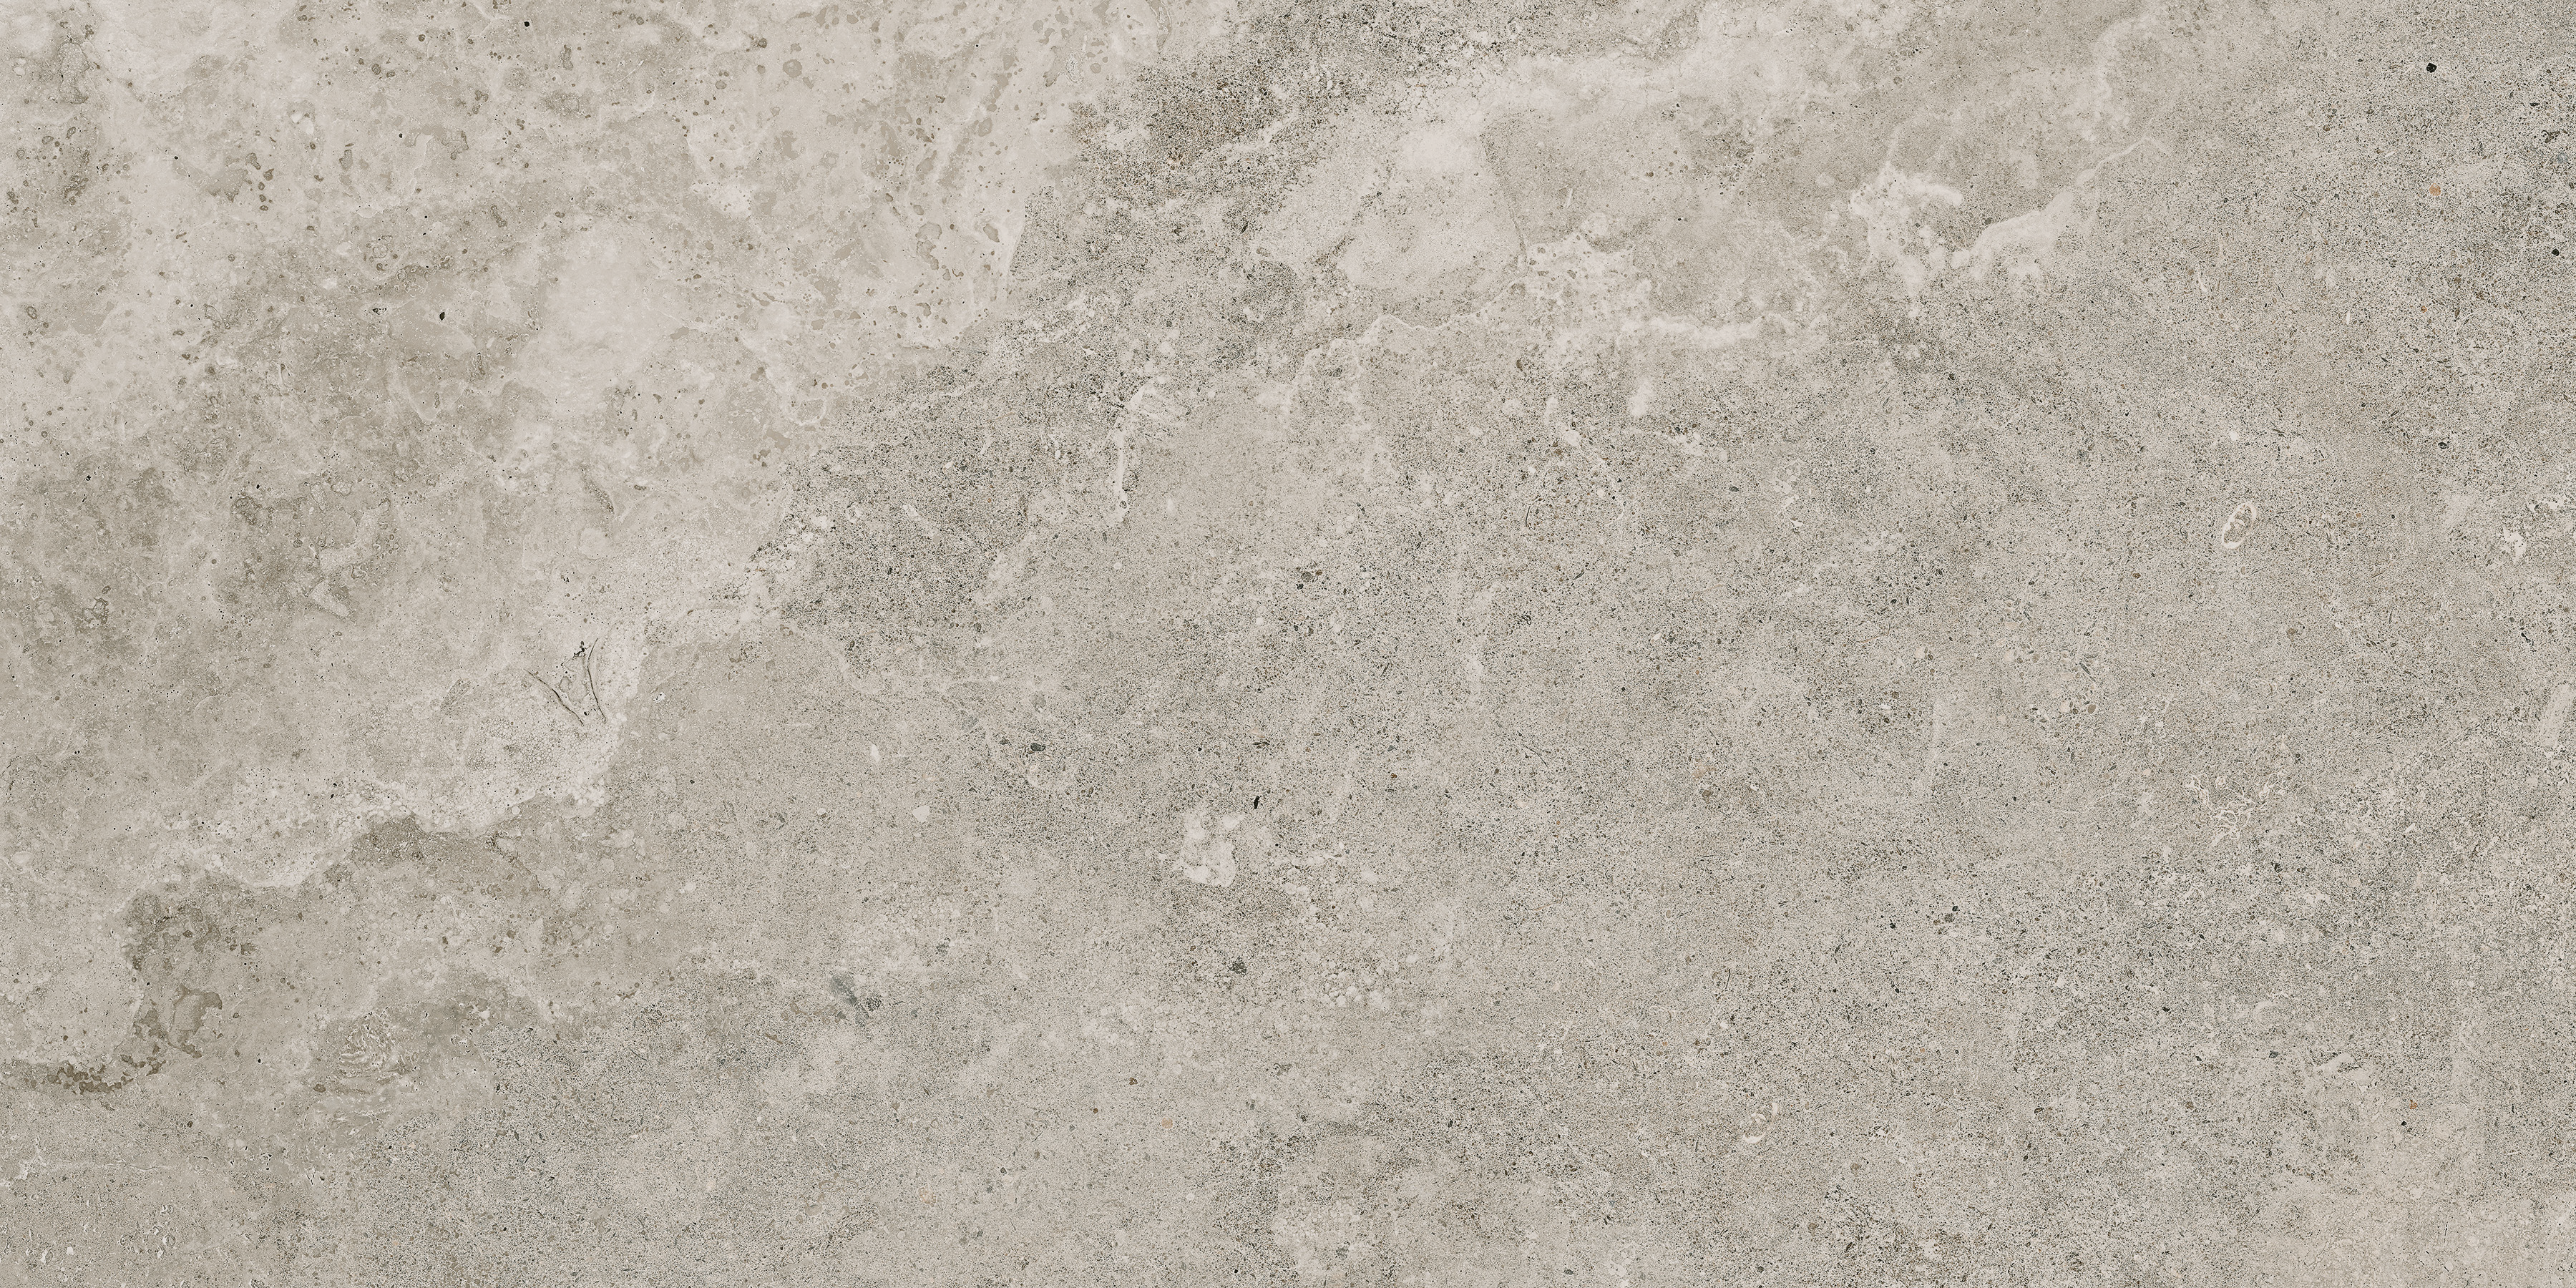 stormio pattern glazed porcelain field tile from veneta anatolia collection distributed by surface group international matte finish pressed edge 12x24 rectangle shape